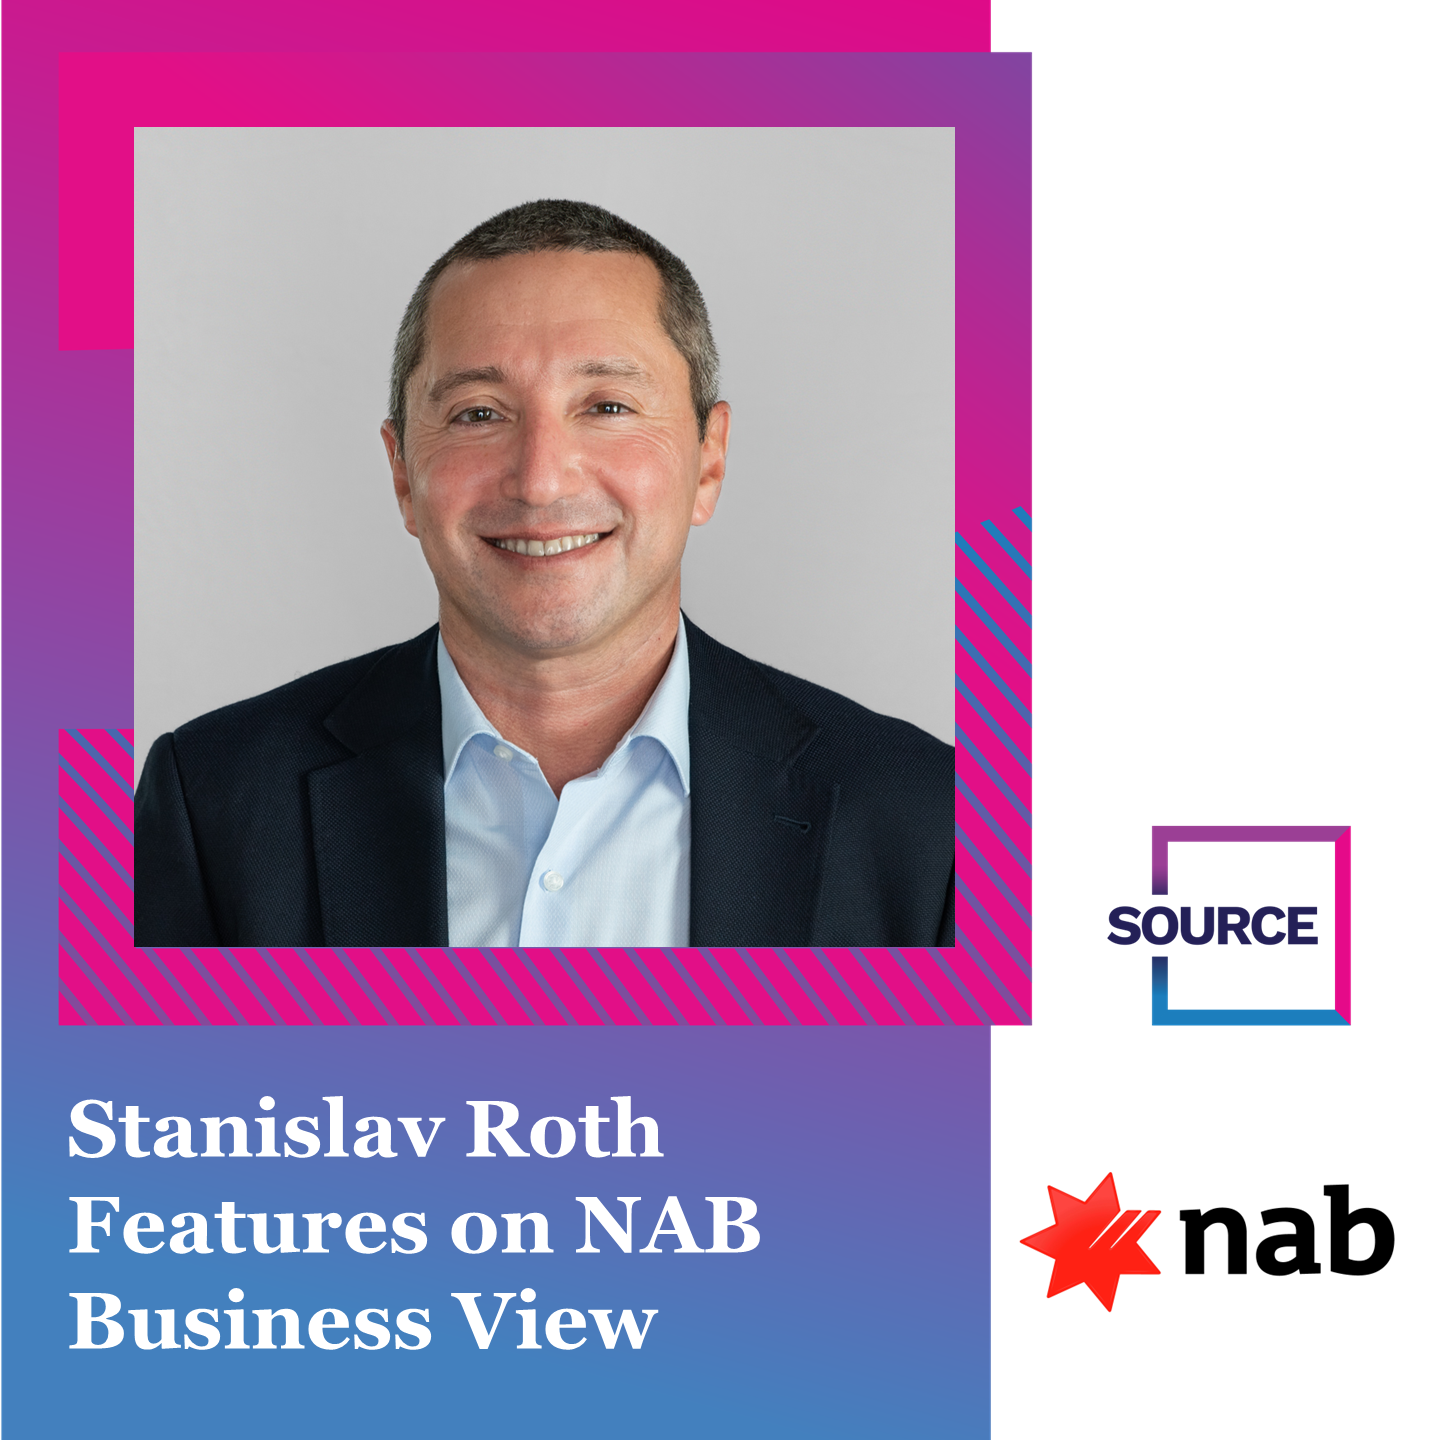 Stanislav Roth Features on NAB Business View_Square